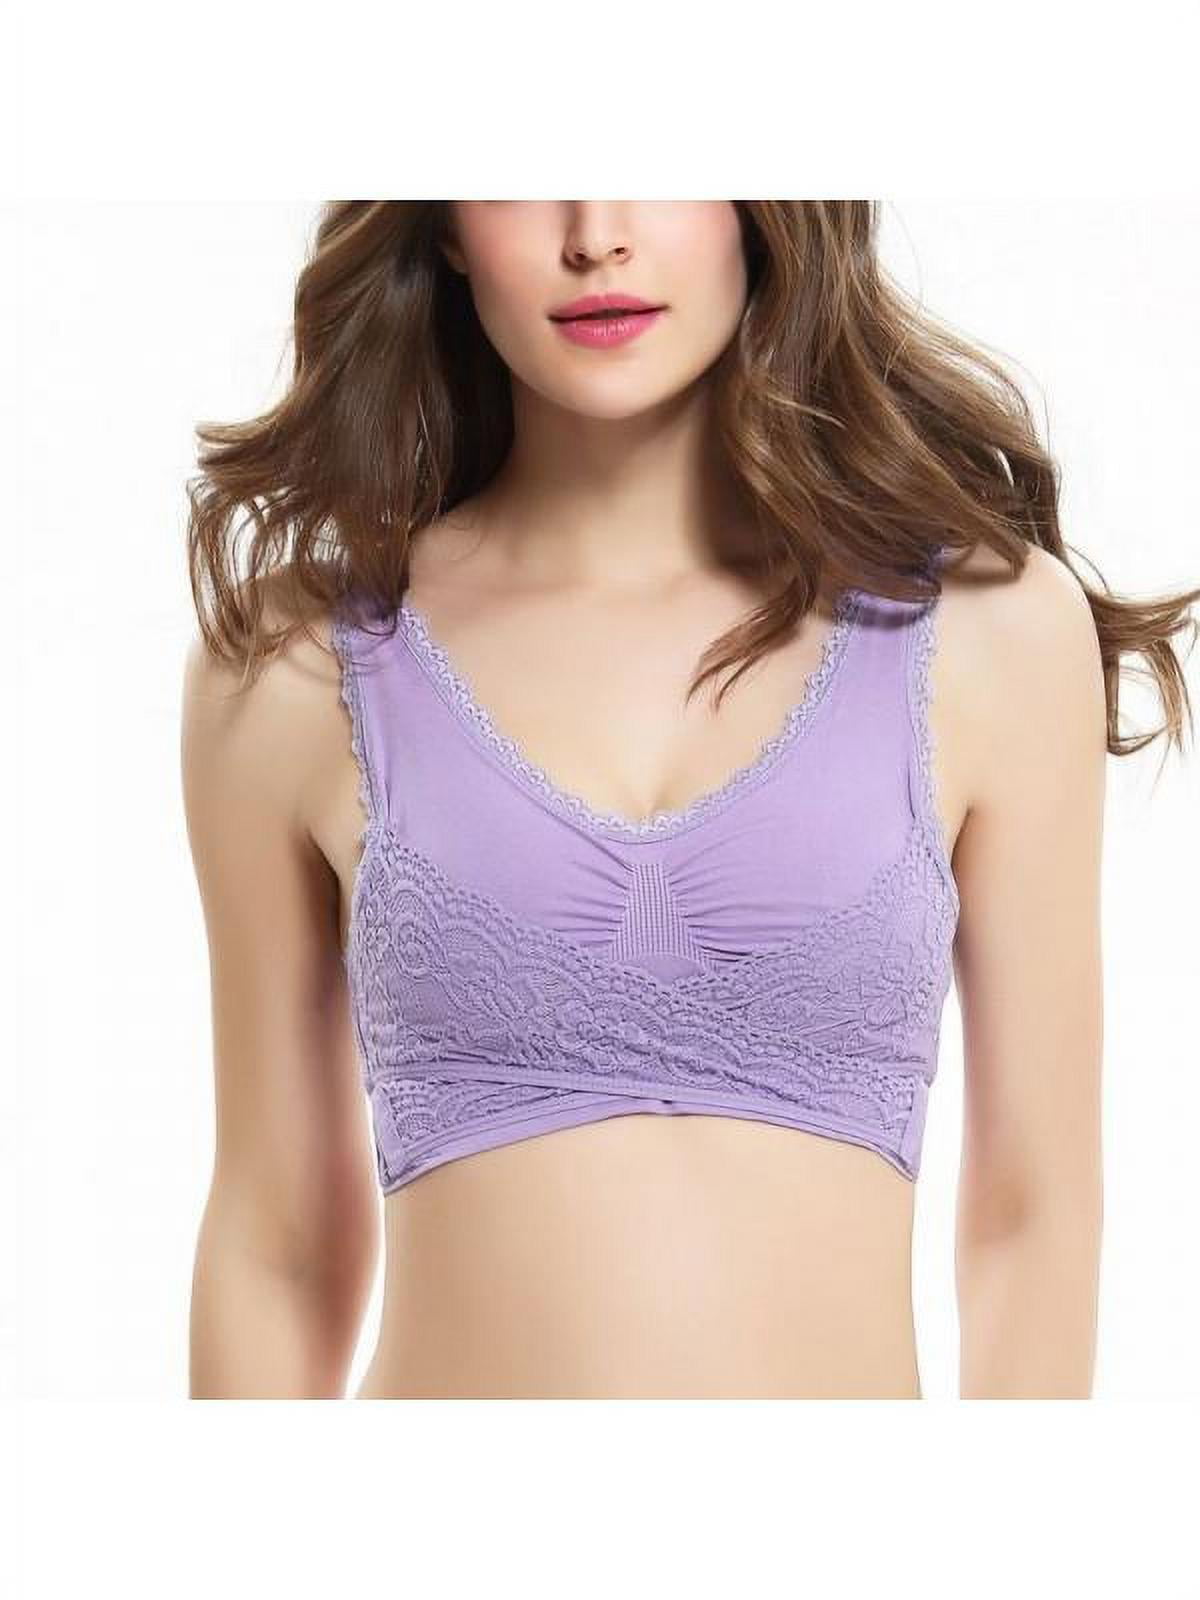 Bras Cross Side Buckle For Women Lingerie Push Up Sexy Bra Without Rims  Female Lace Gathered Sporty Underwear Fitness From Bifangg, $39.81